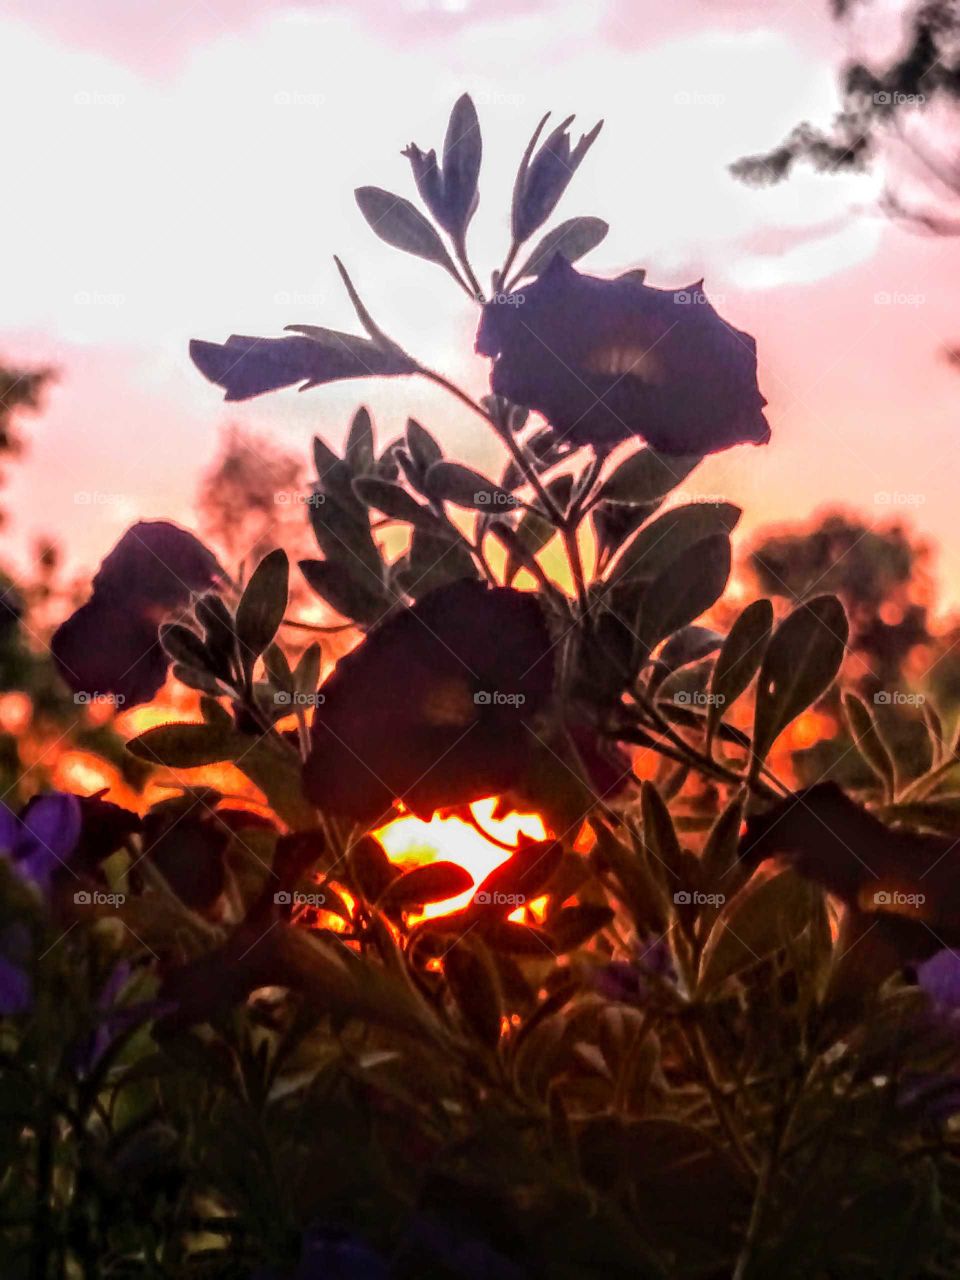 flowers at sunset